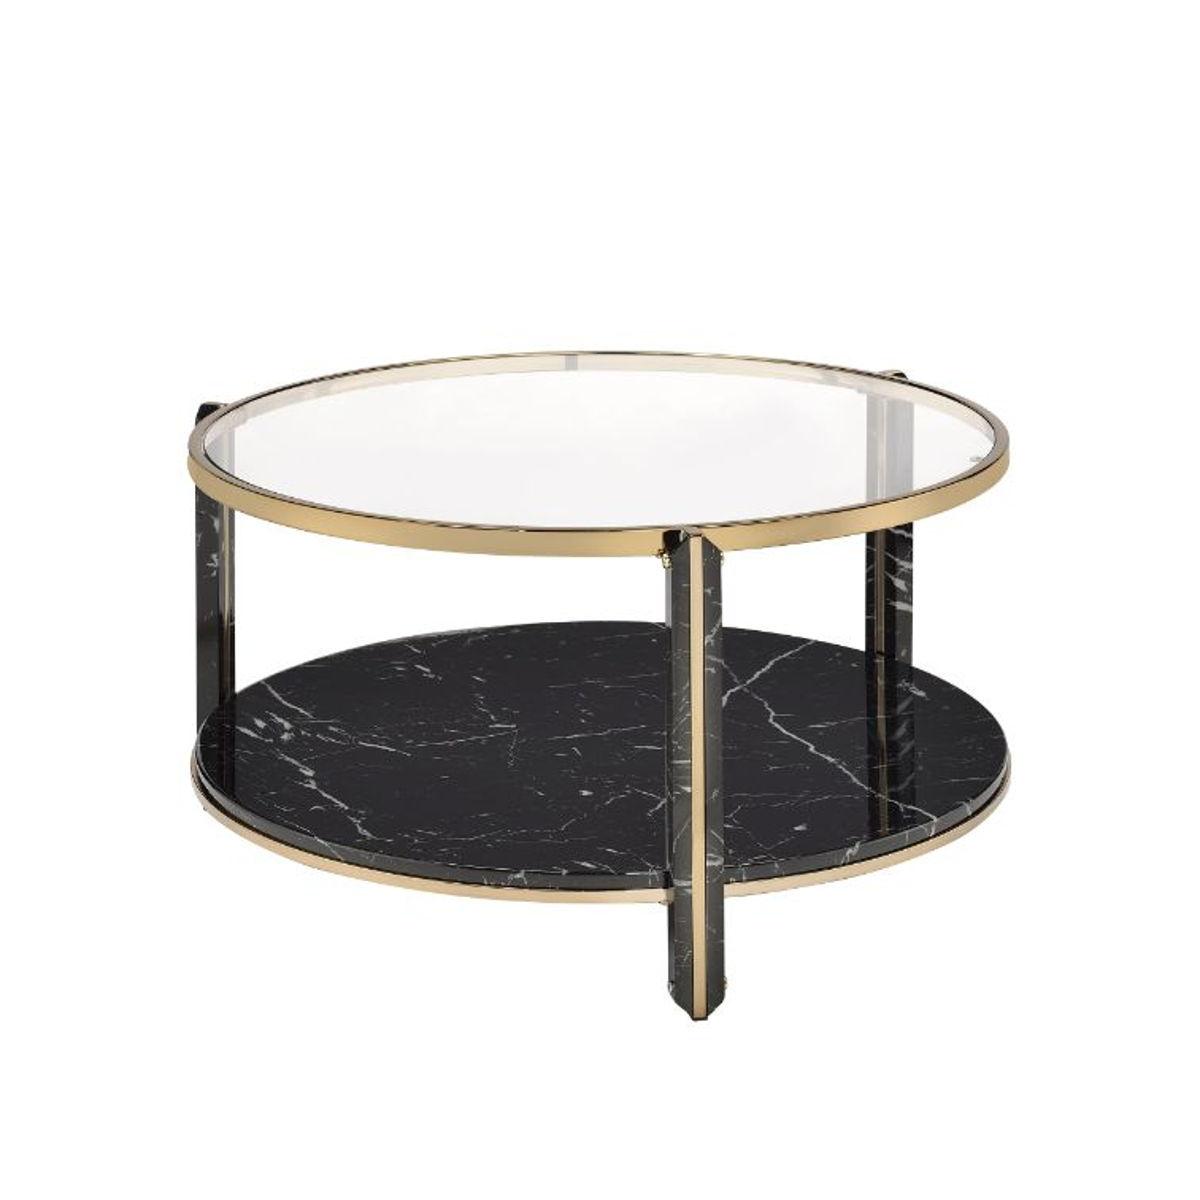 ACME - Thistle - Coffee Table - Clear Glass, Faux Black Marble & Champagne Finish - 5th Avenue Furniture